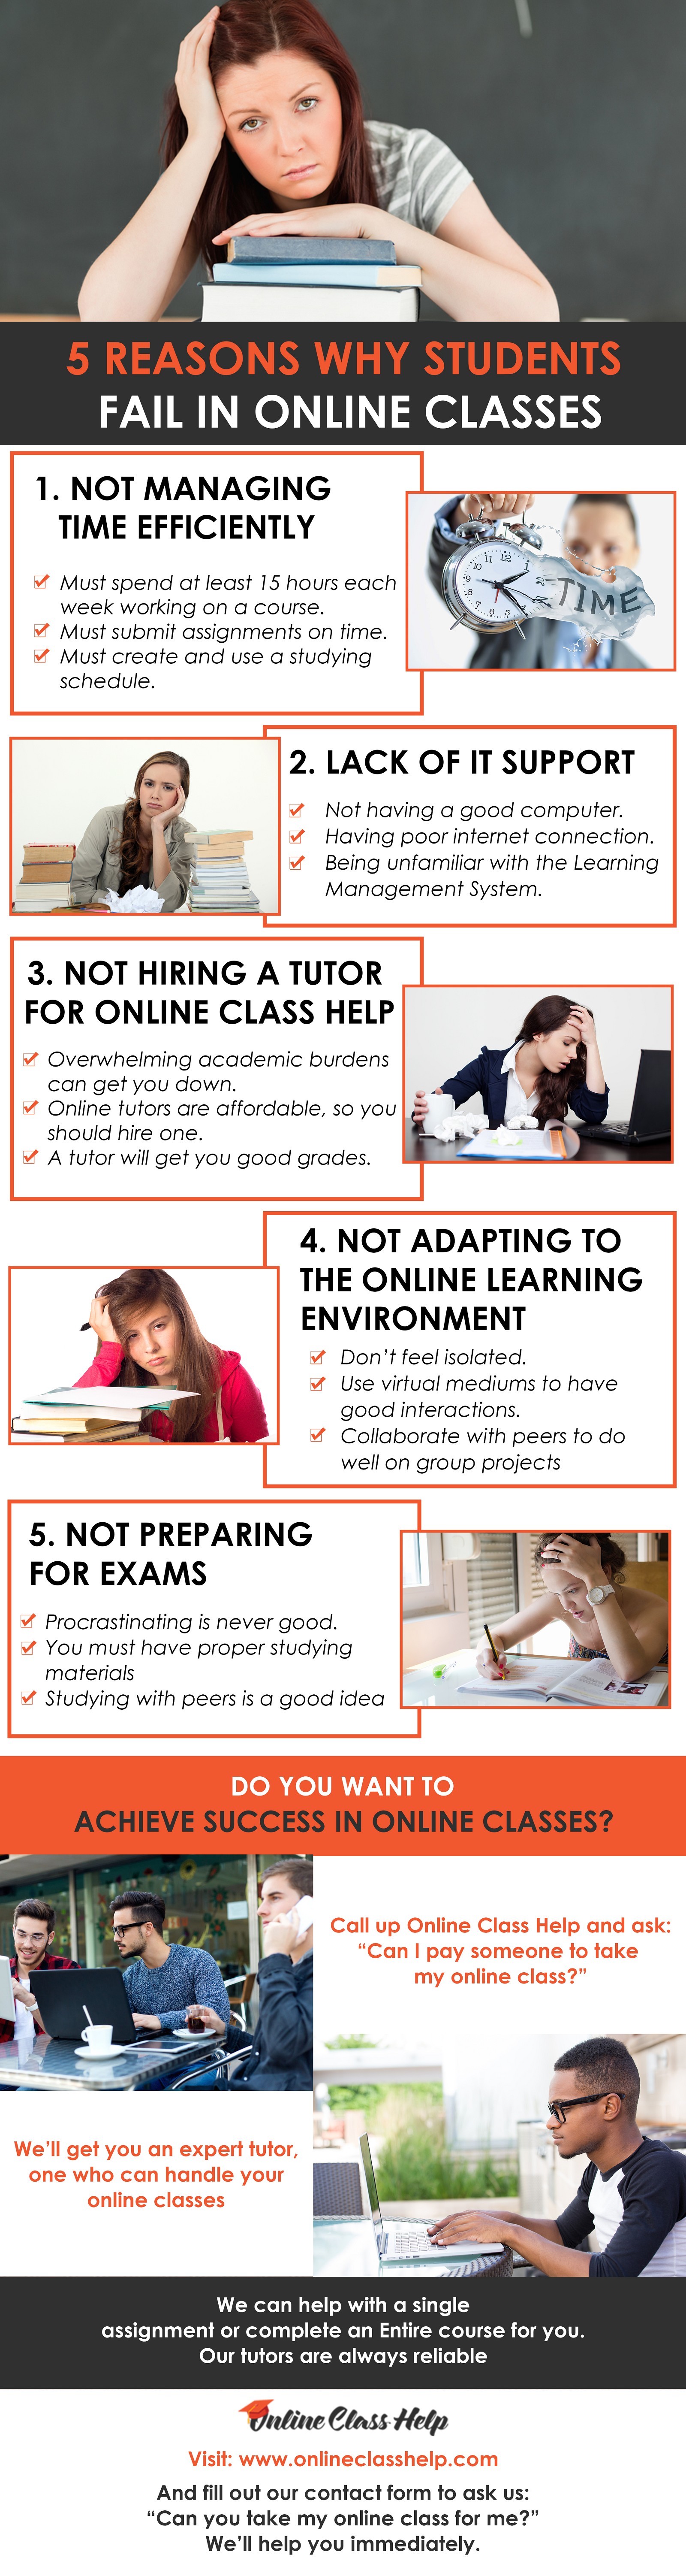 Infographic: Top Reasons Why Students Fail In Online Classes